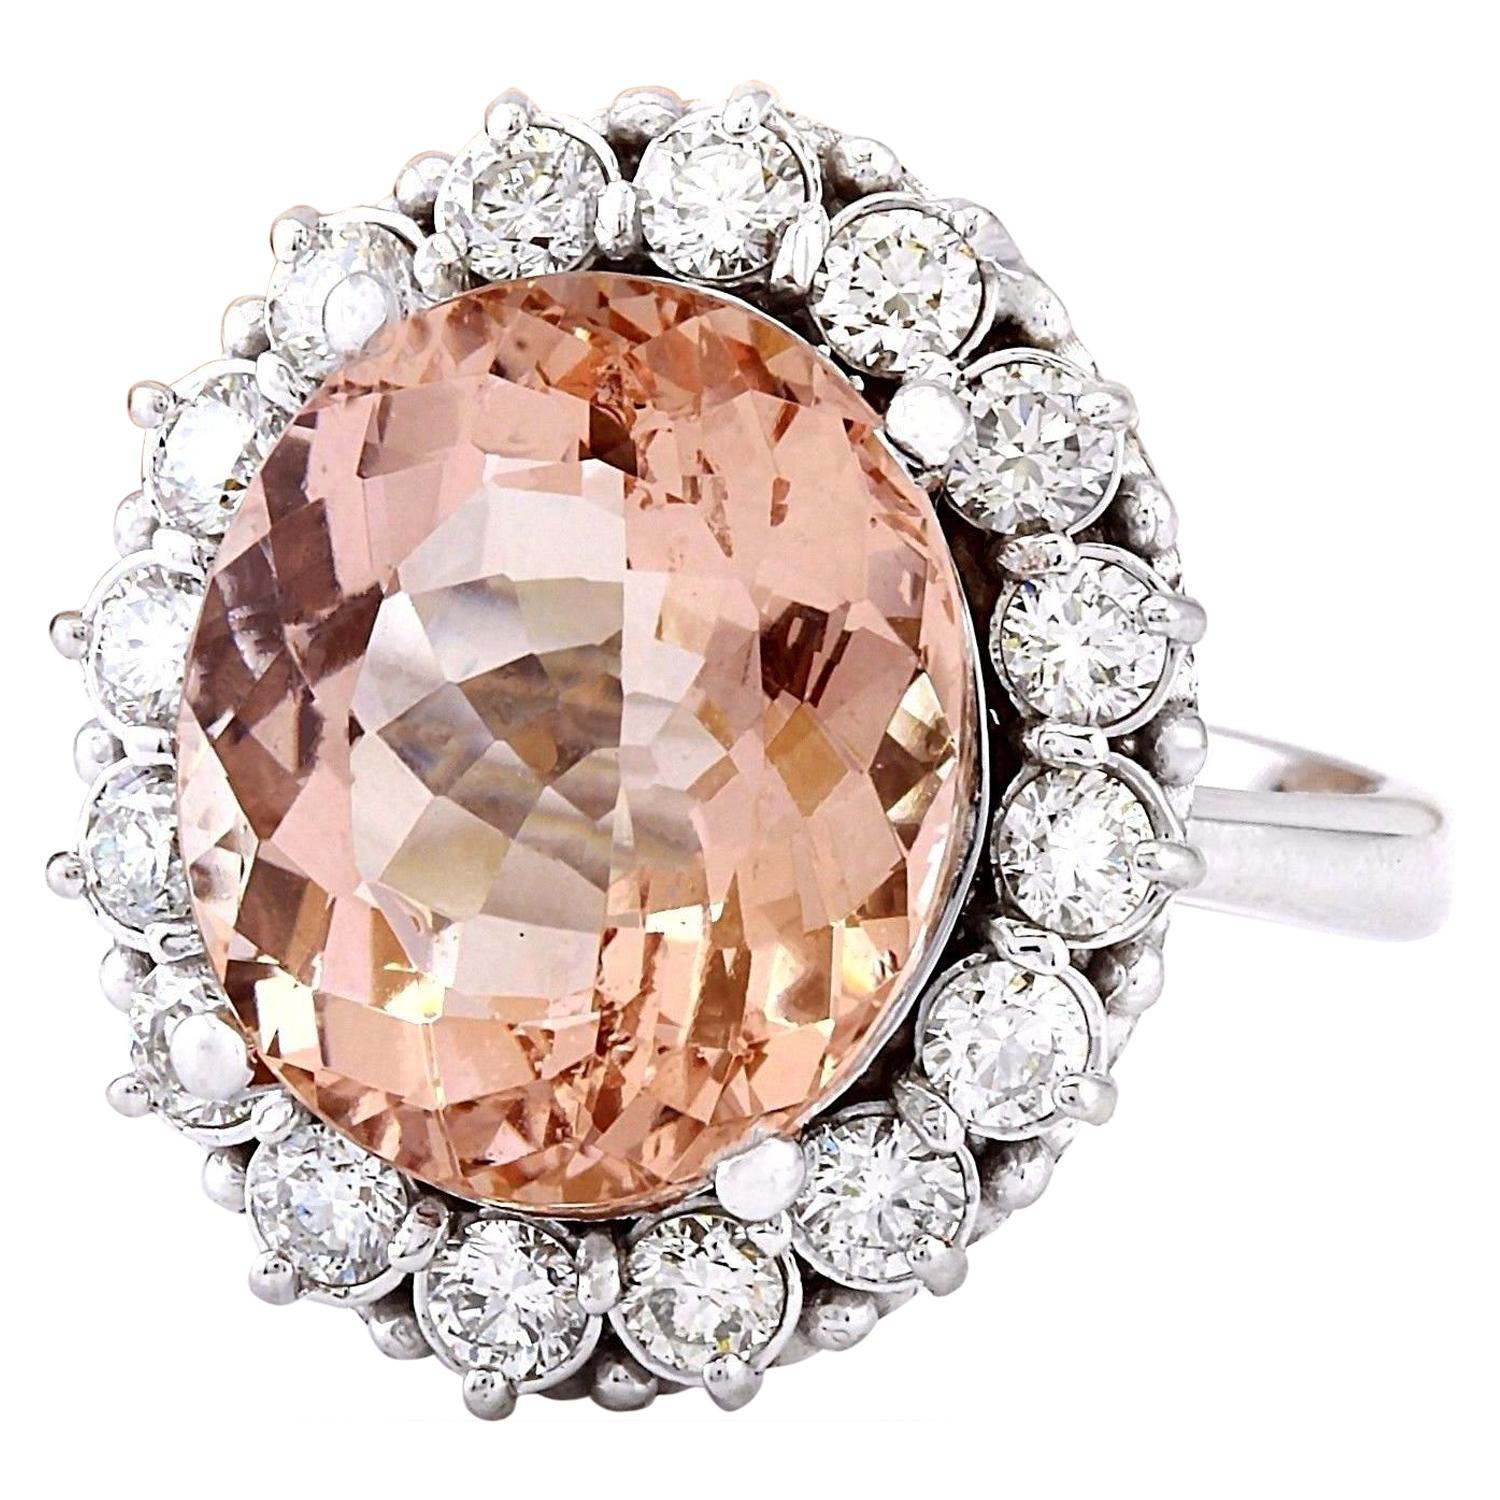 8.72 Carat Natural Morganite 14K Solid White Gold Diamond Ring
 Item Type: Ring
 Item Style: Cocktail
 Material: 14K White Gold
 Mainstone: Morganite
 Stone Color: Peach
 Stone Weight: 7.50 Carat
 Stone Shape: Oval
 Stone Quantity: 1
 Stone